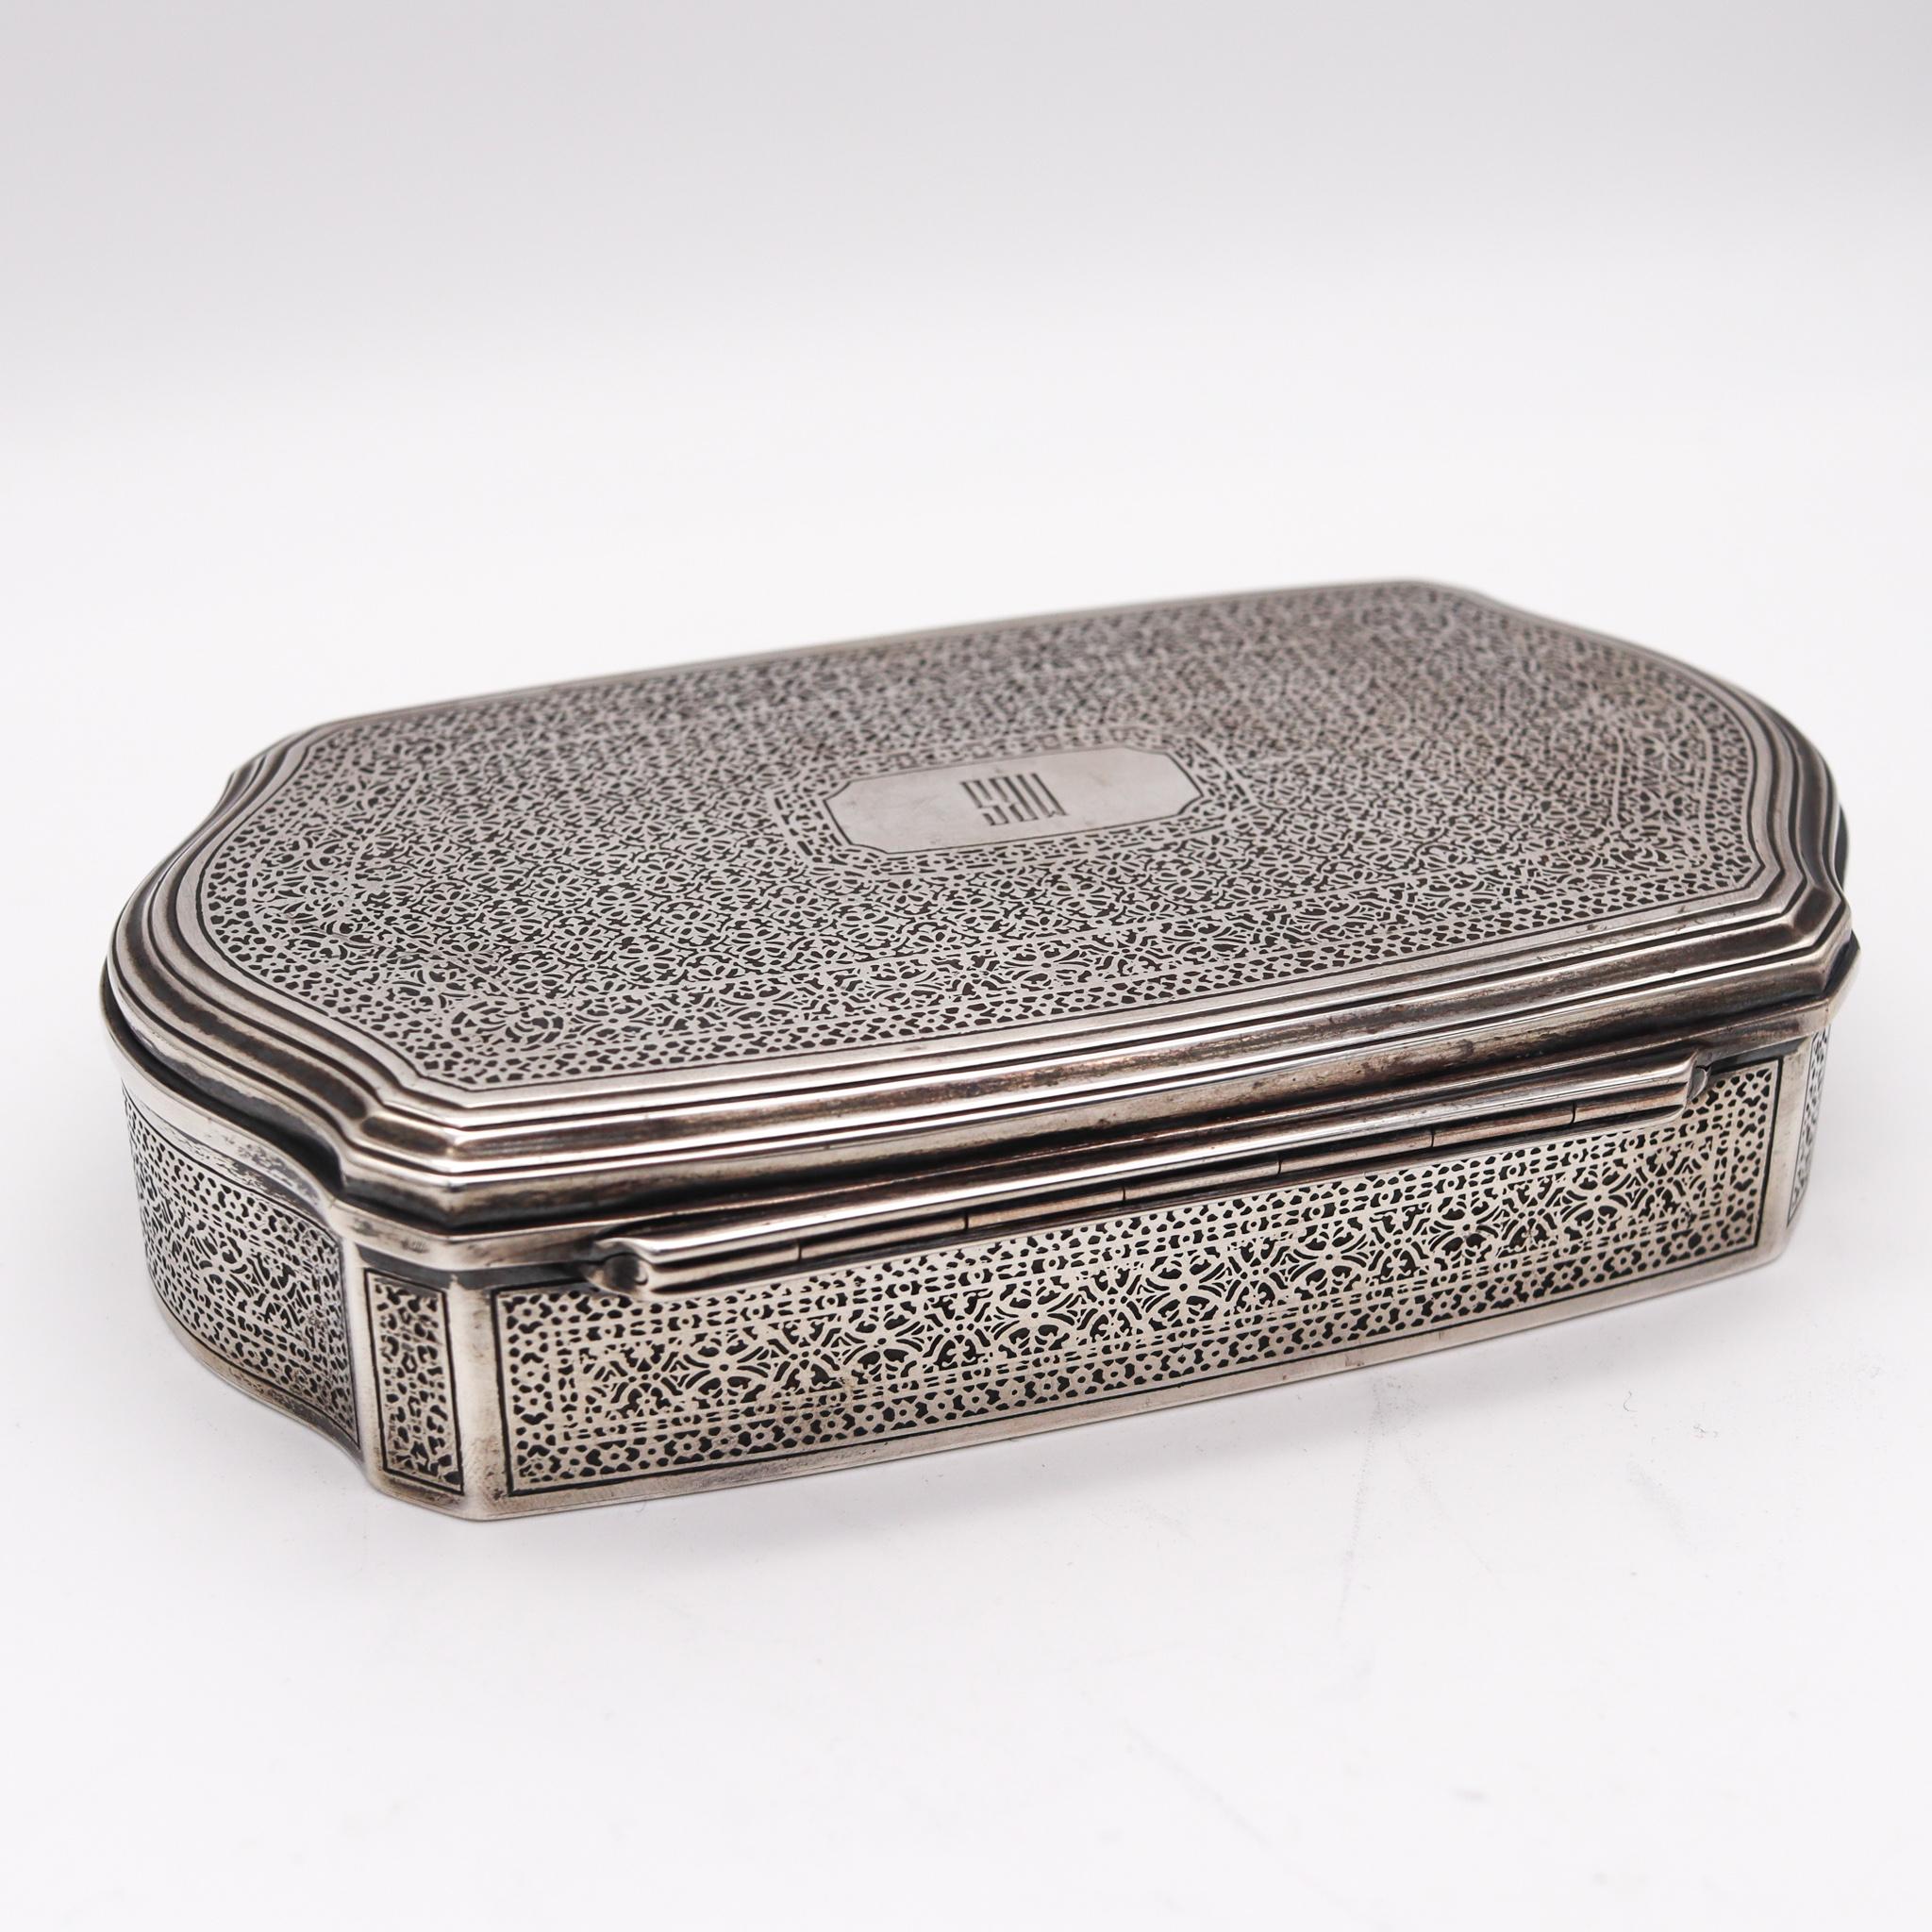 Tiffany & Co. 1927 Art Deco Chiseled Arabesque Box with Lid .925 Sterling Silver 1